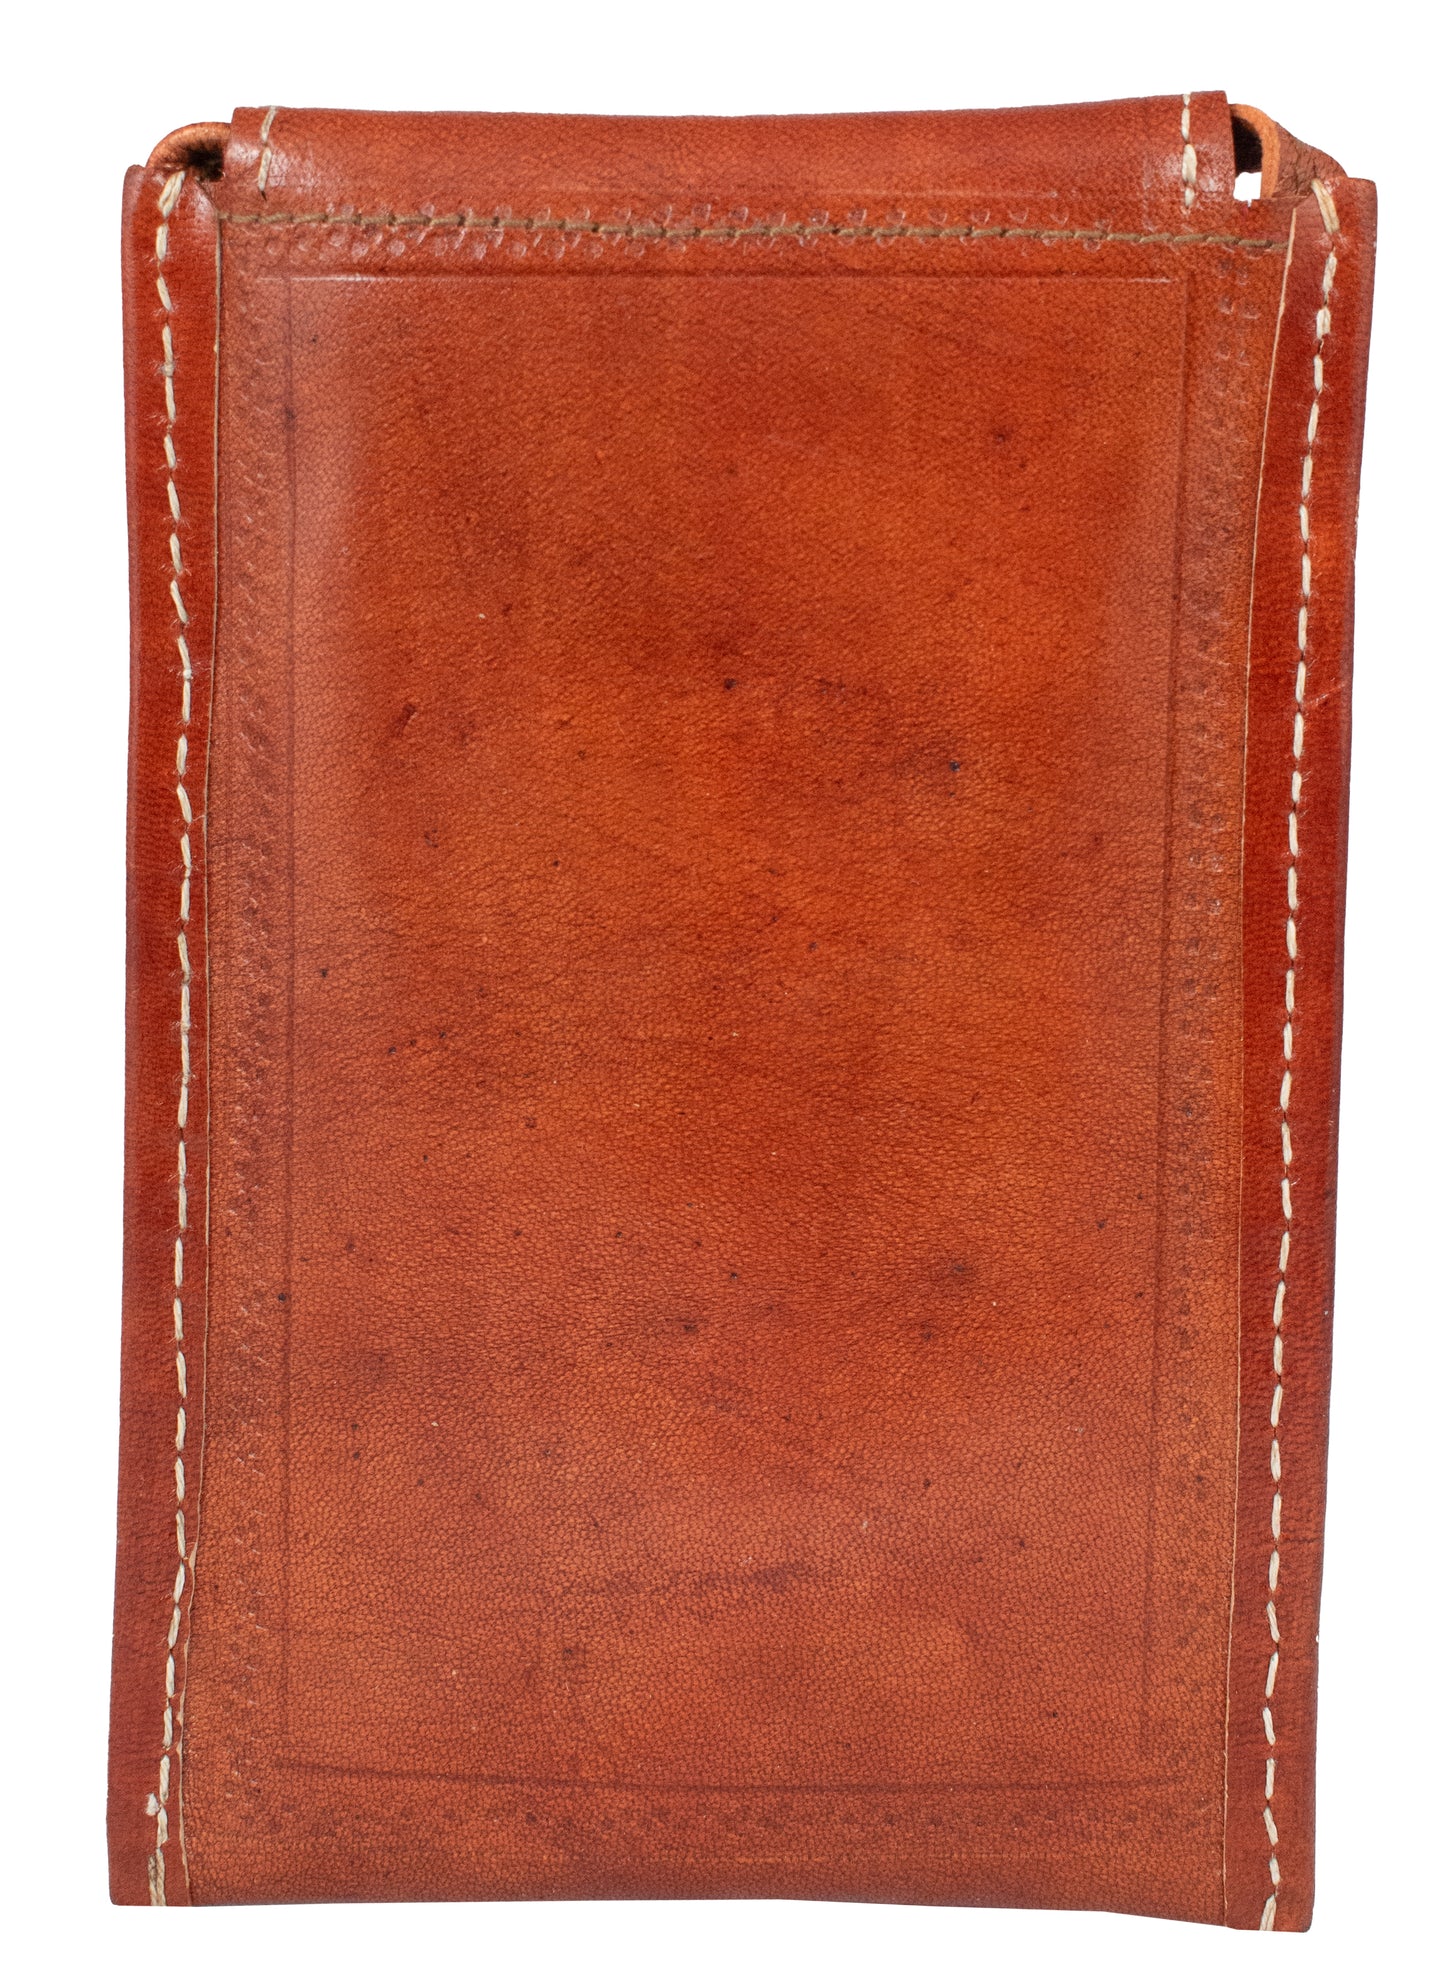 Leather Craft Punch Work Pure Leather Mobile Cover    -  SKU: AB20704B